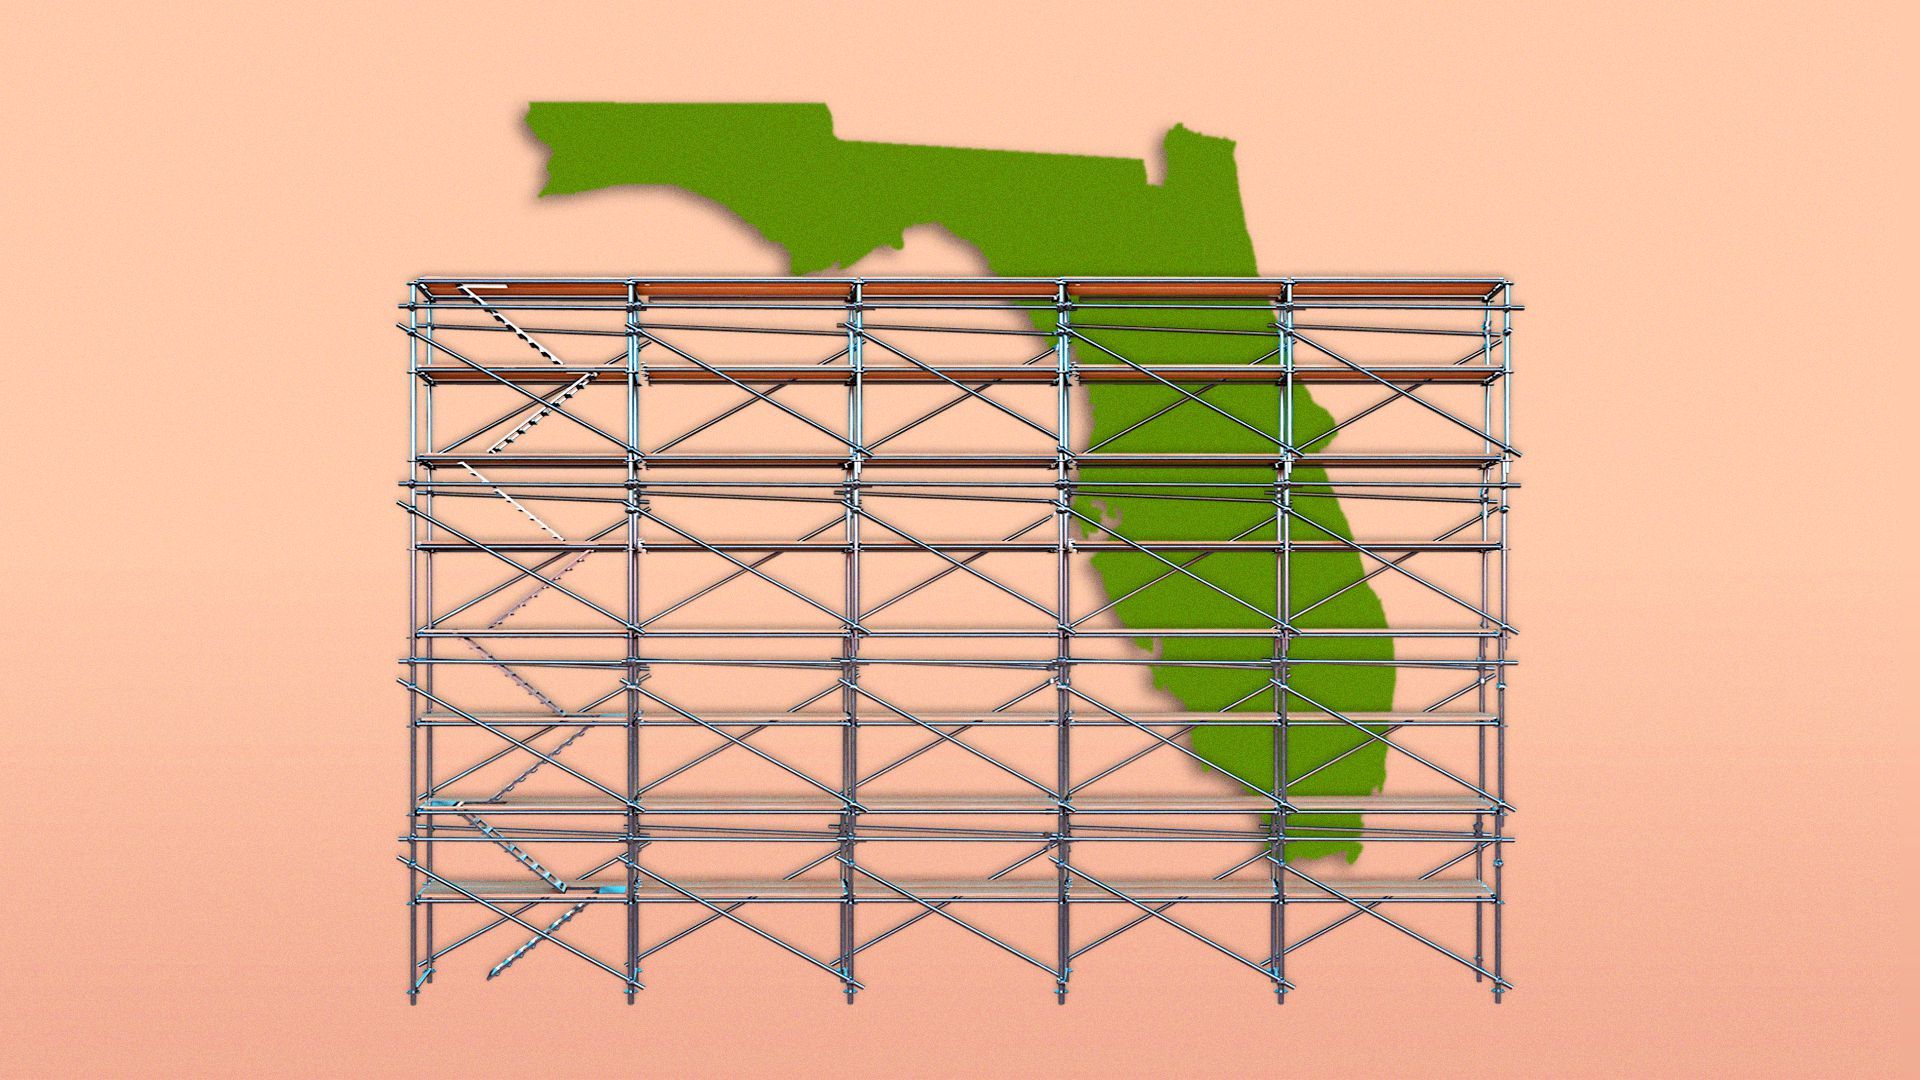 Illustration of the state of Florida, with scaffolding in front.